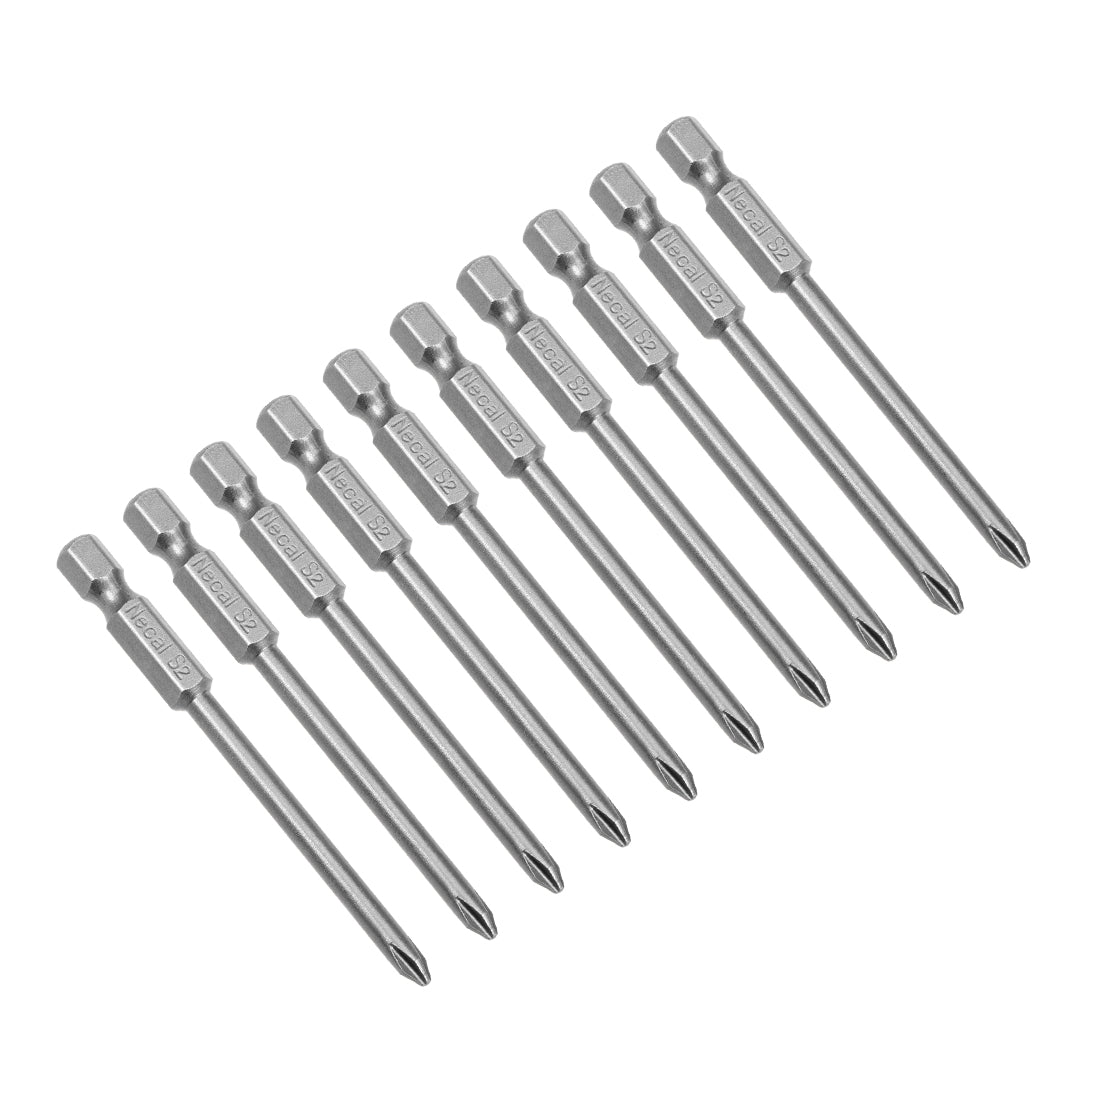 uxcell Uxcell Magnetic Phillips Screwdriver Bits, Hex Shank S2 Power Tool Kit